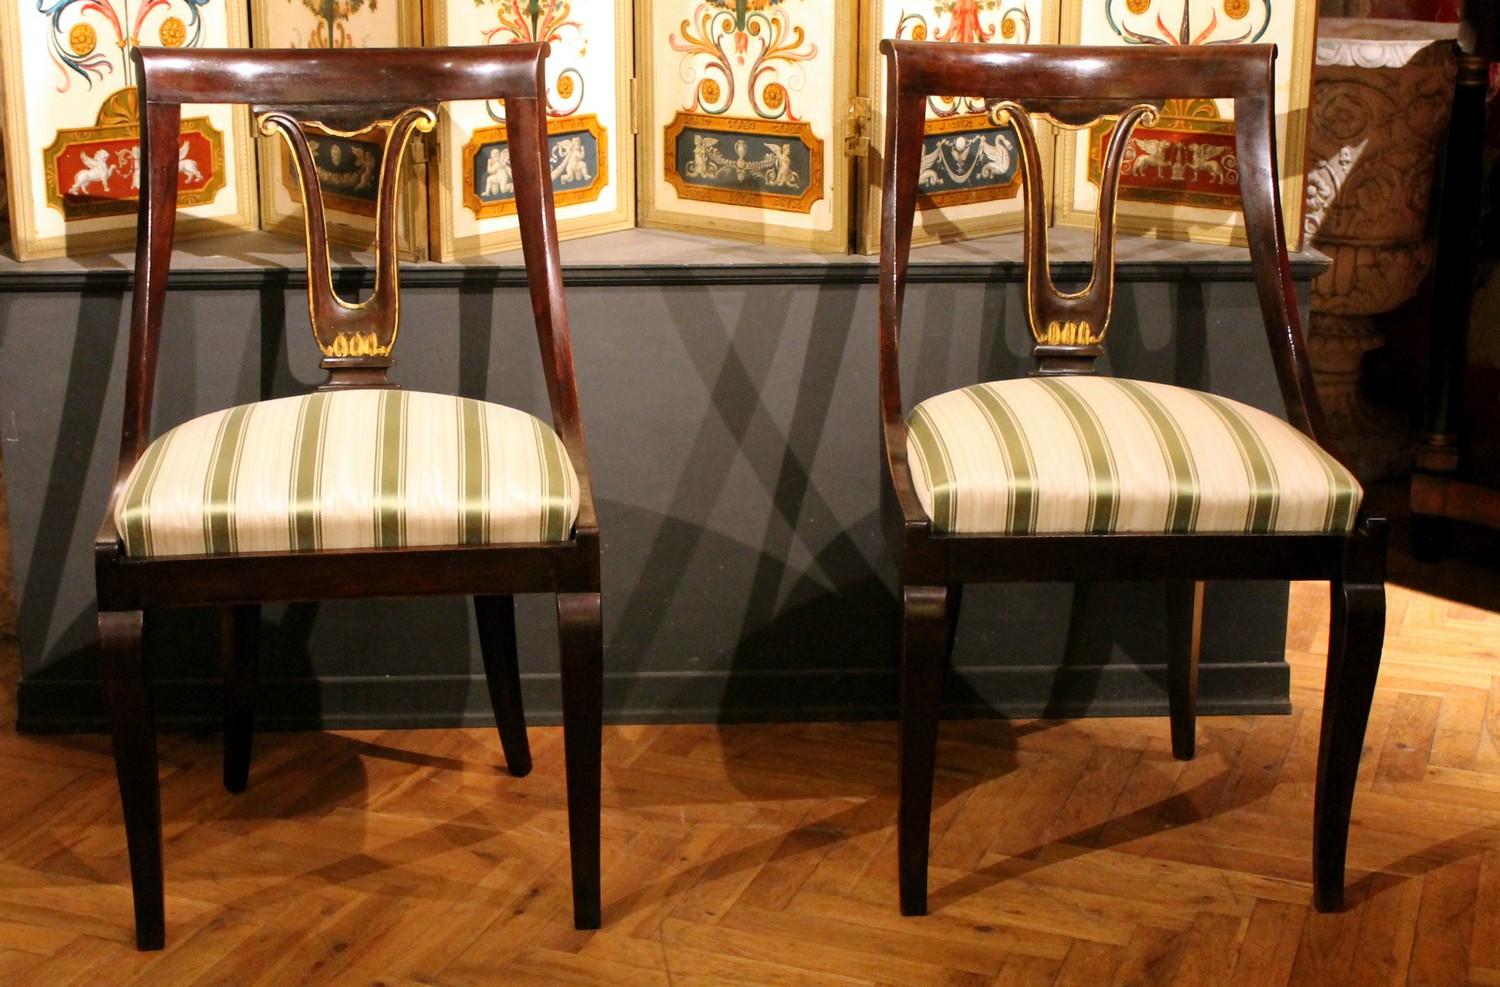 This beautiful set of four late 18th-early 19th century European Directoire period mahogany gondola chairs will be the perfect addition to your dining room or living room as they can be used as dining room chairs or side side chairs thanks to their